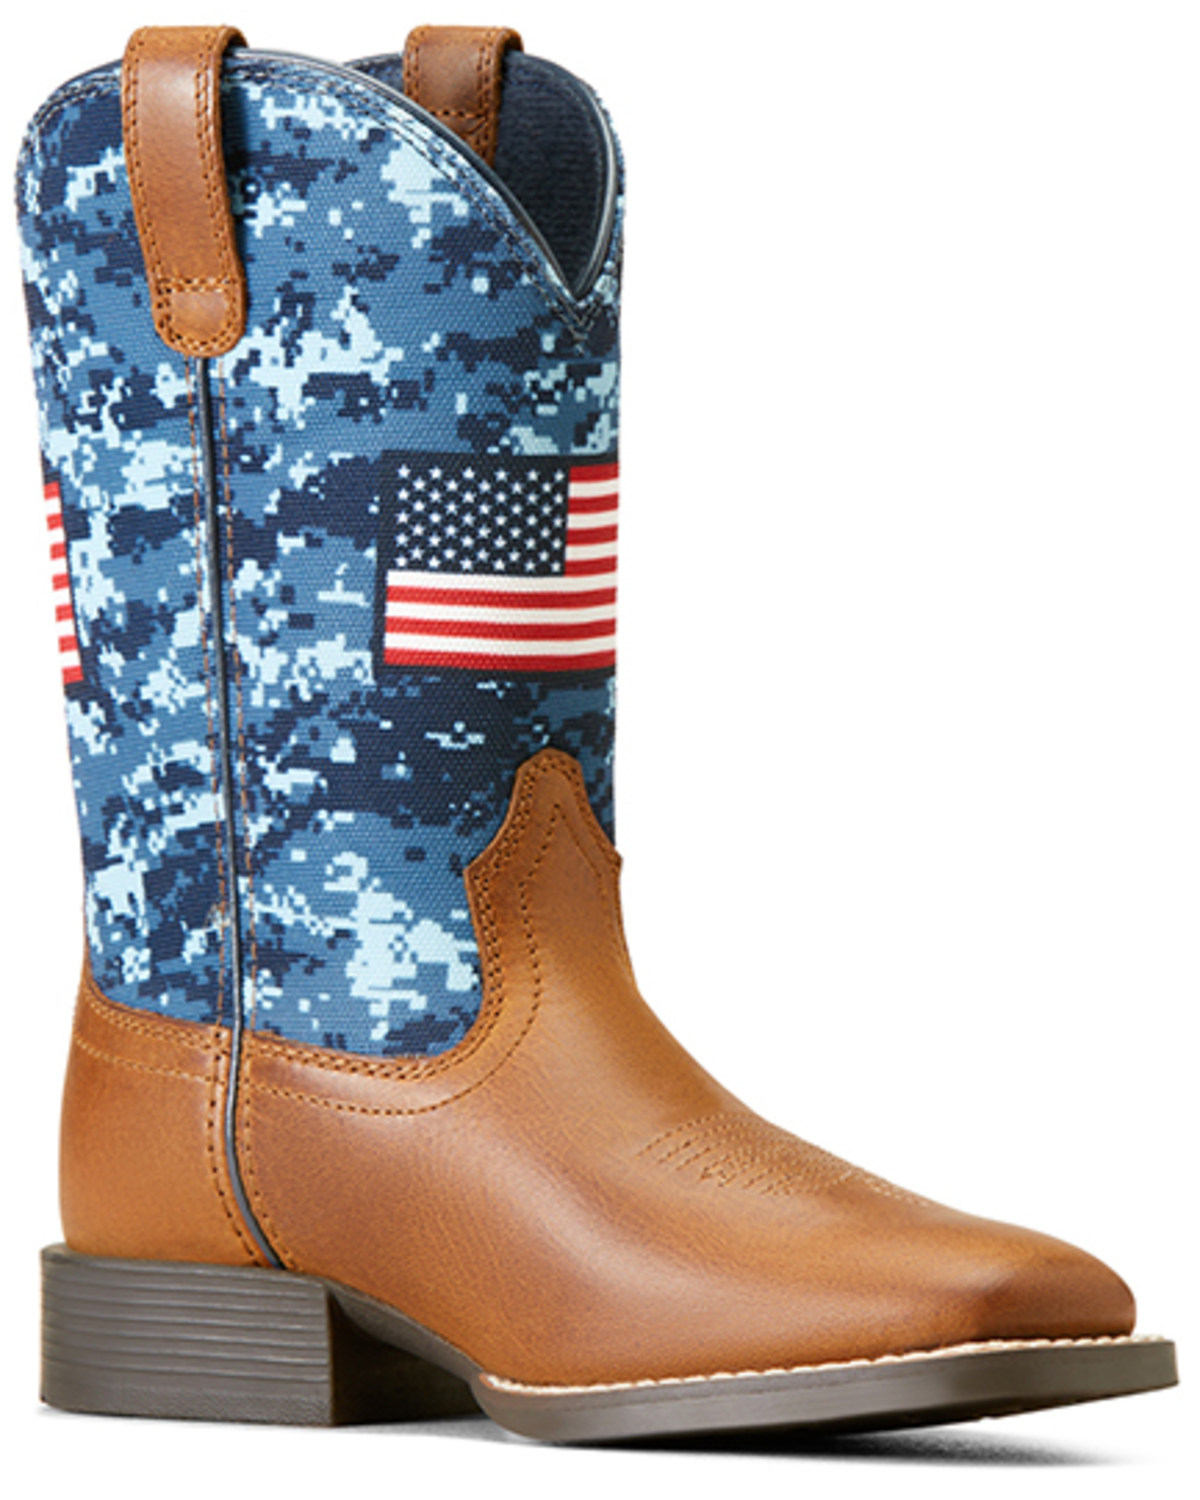 Ariat Boys' Patriot Western Boots - Broad Square Toe